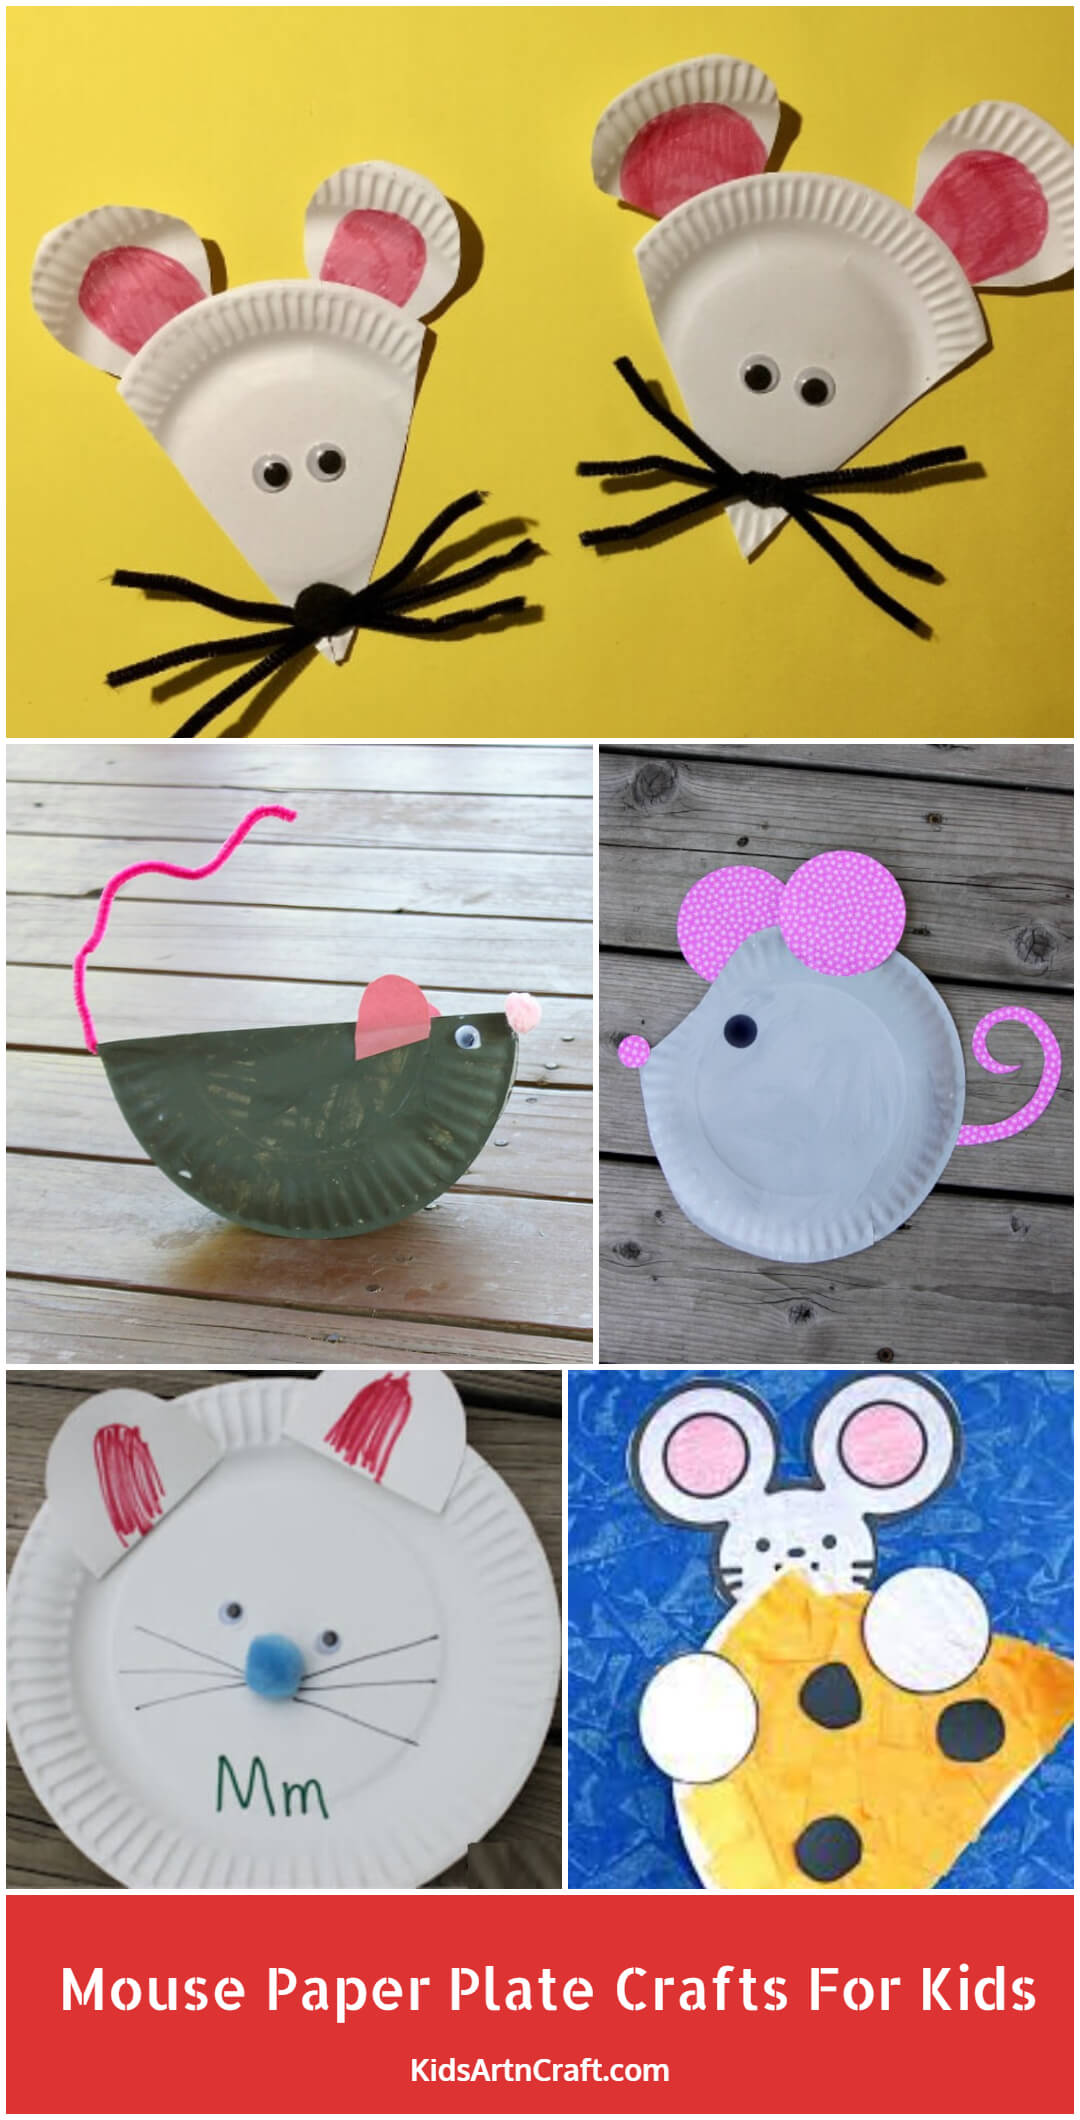 Mouse Paper Plate Crafts For Kids